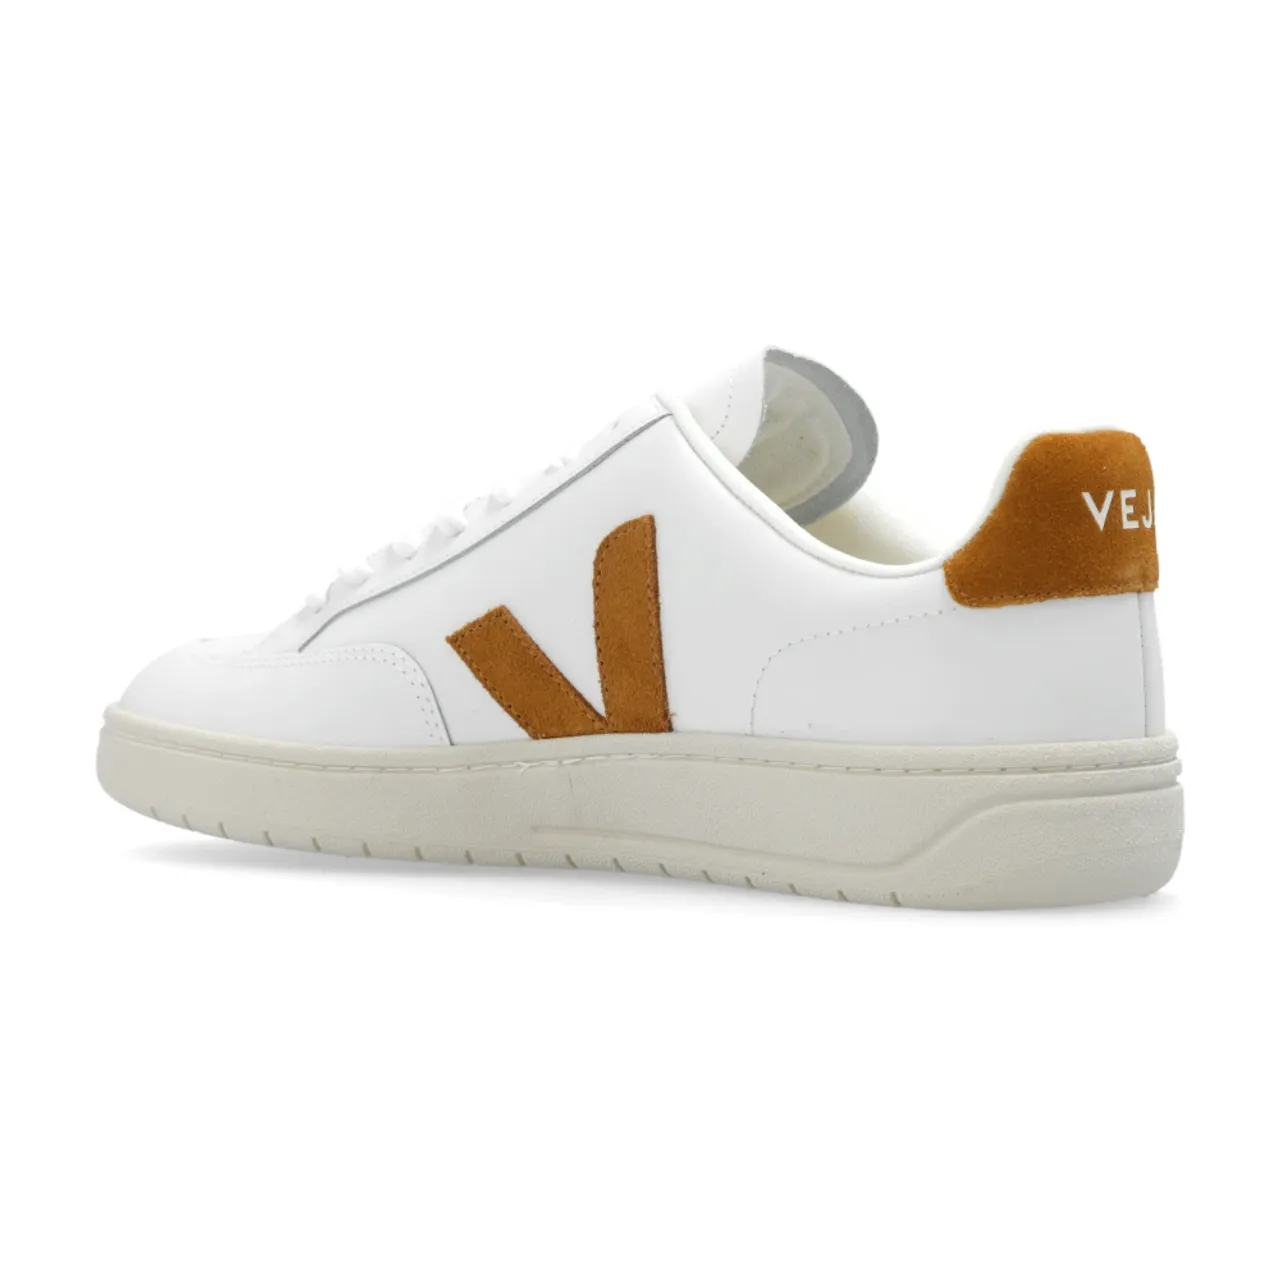 Veja , ‘V-12 Leather’ sneakers ,White male, Sizes: